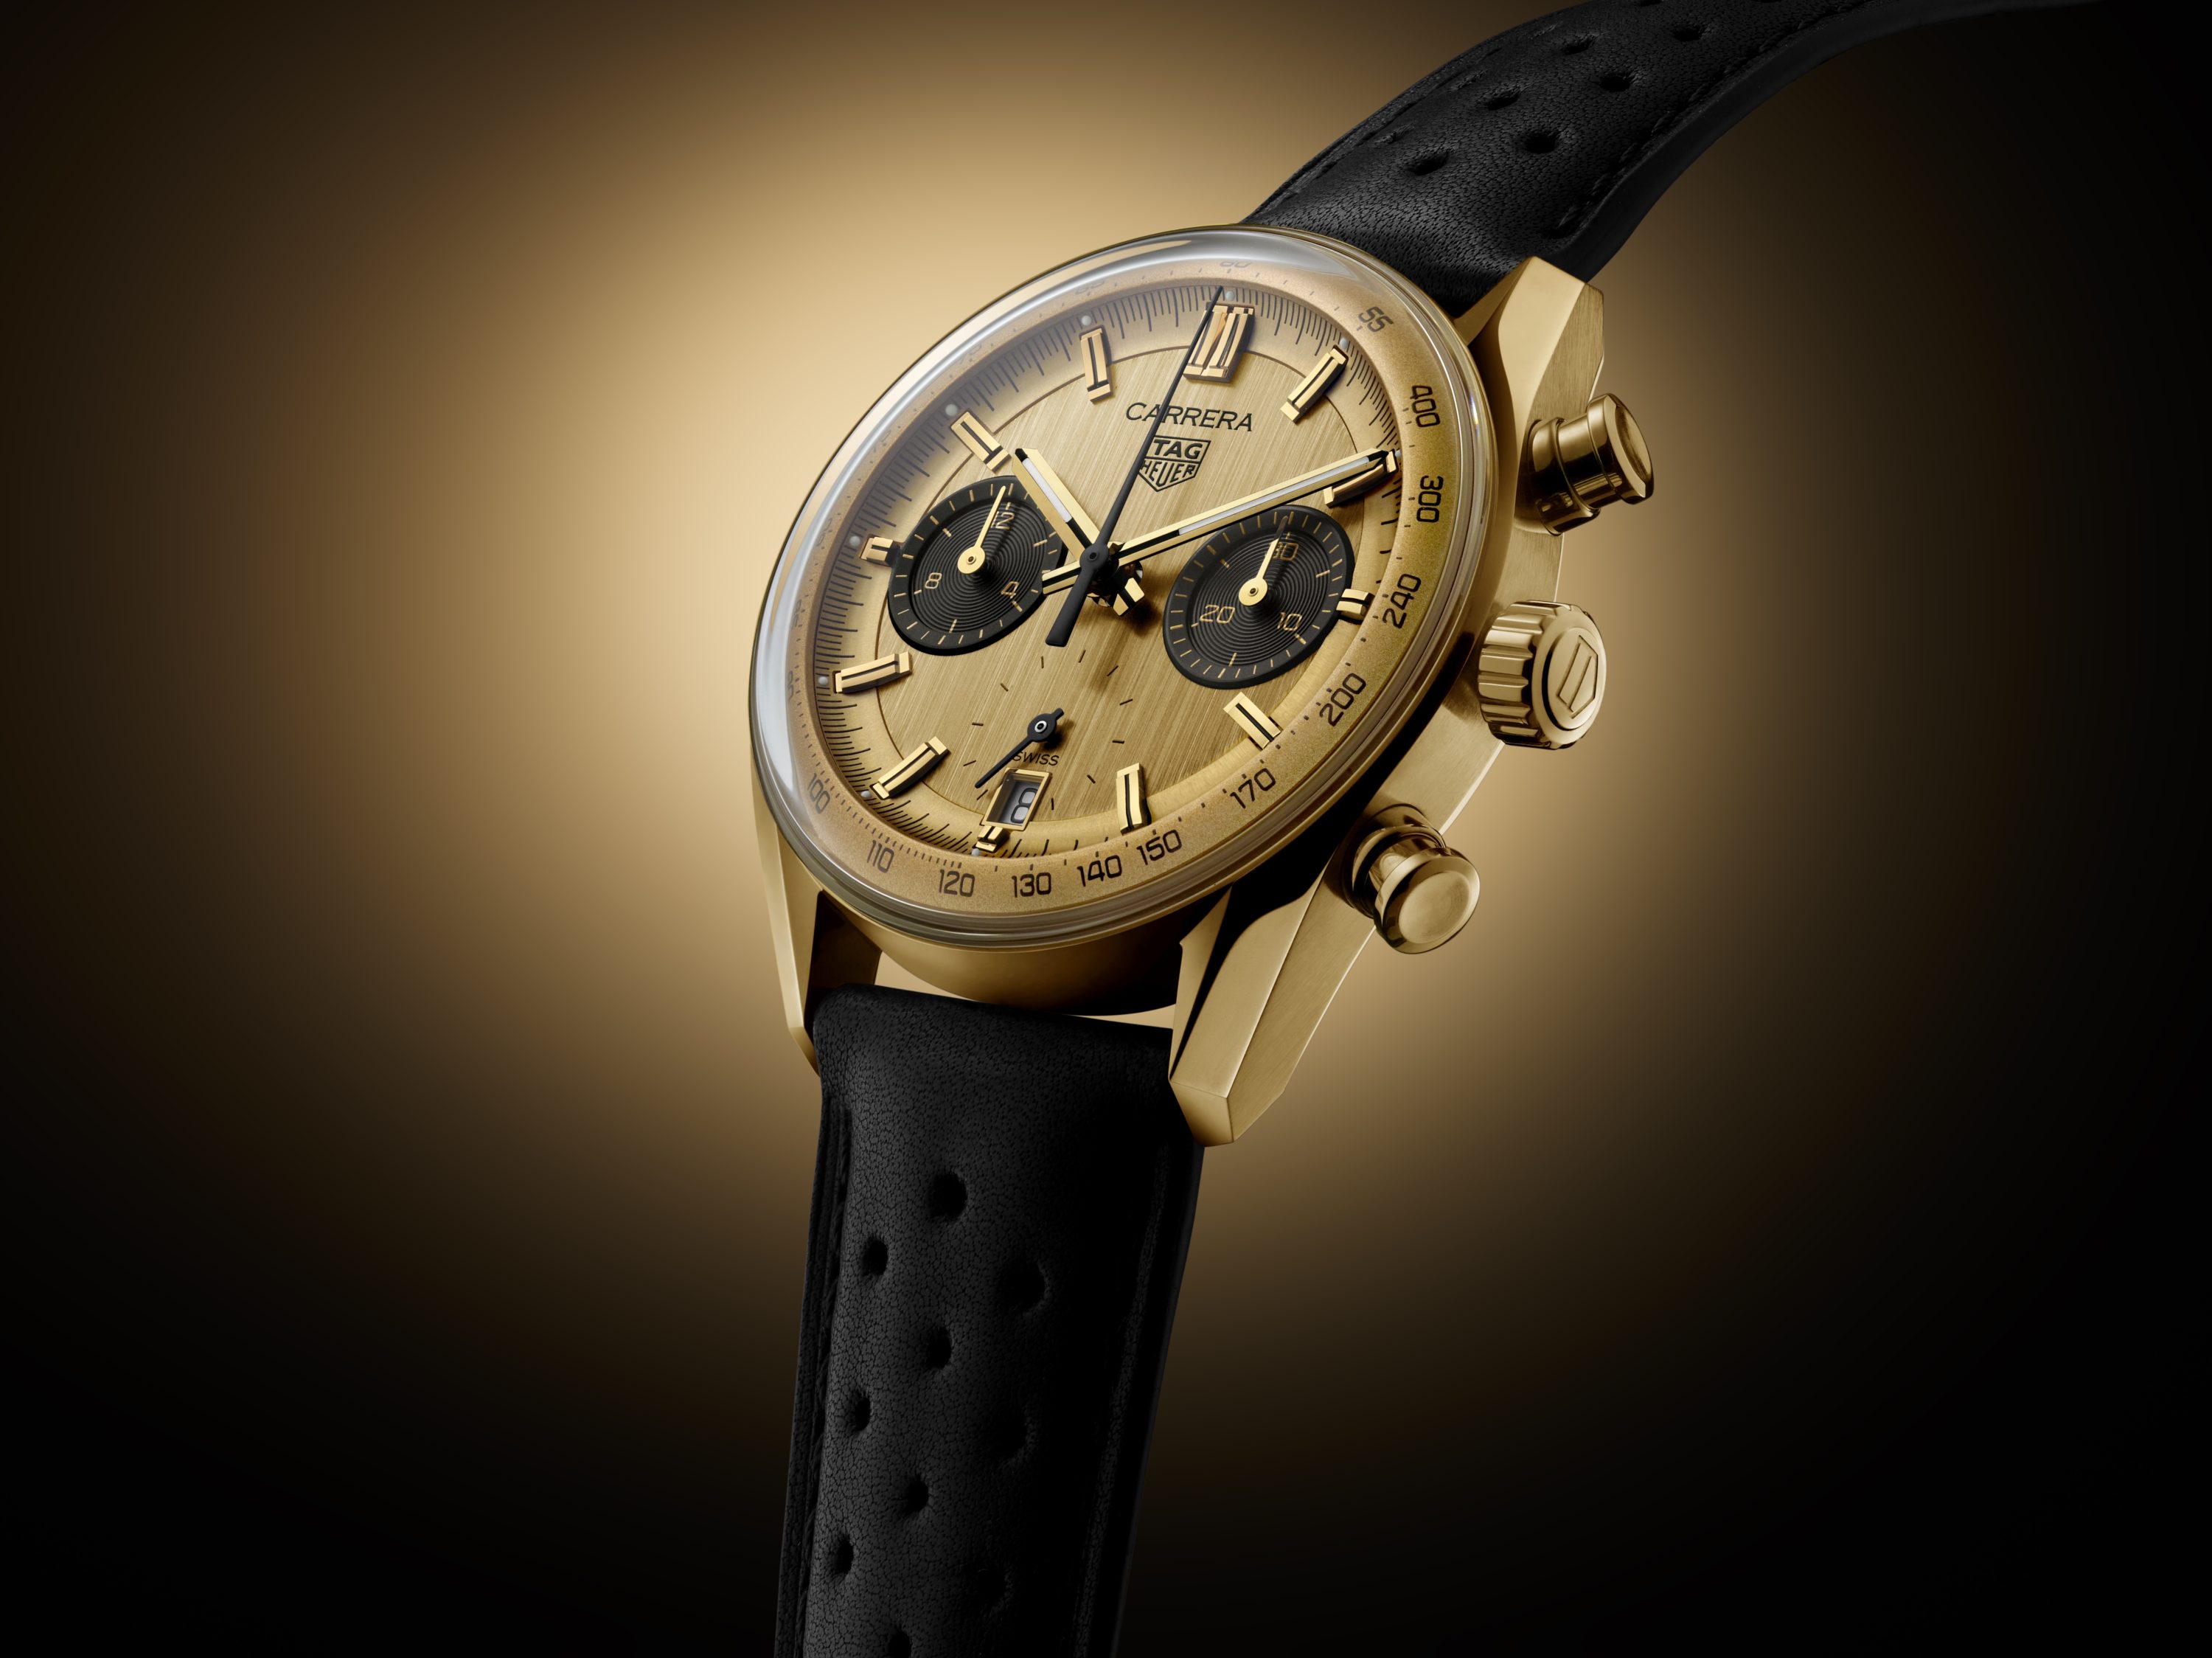 Celebrating Champions: TAG Heuer Introduces Latest Carrera Chronograph in Gold Panda-Style